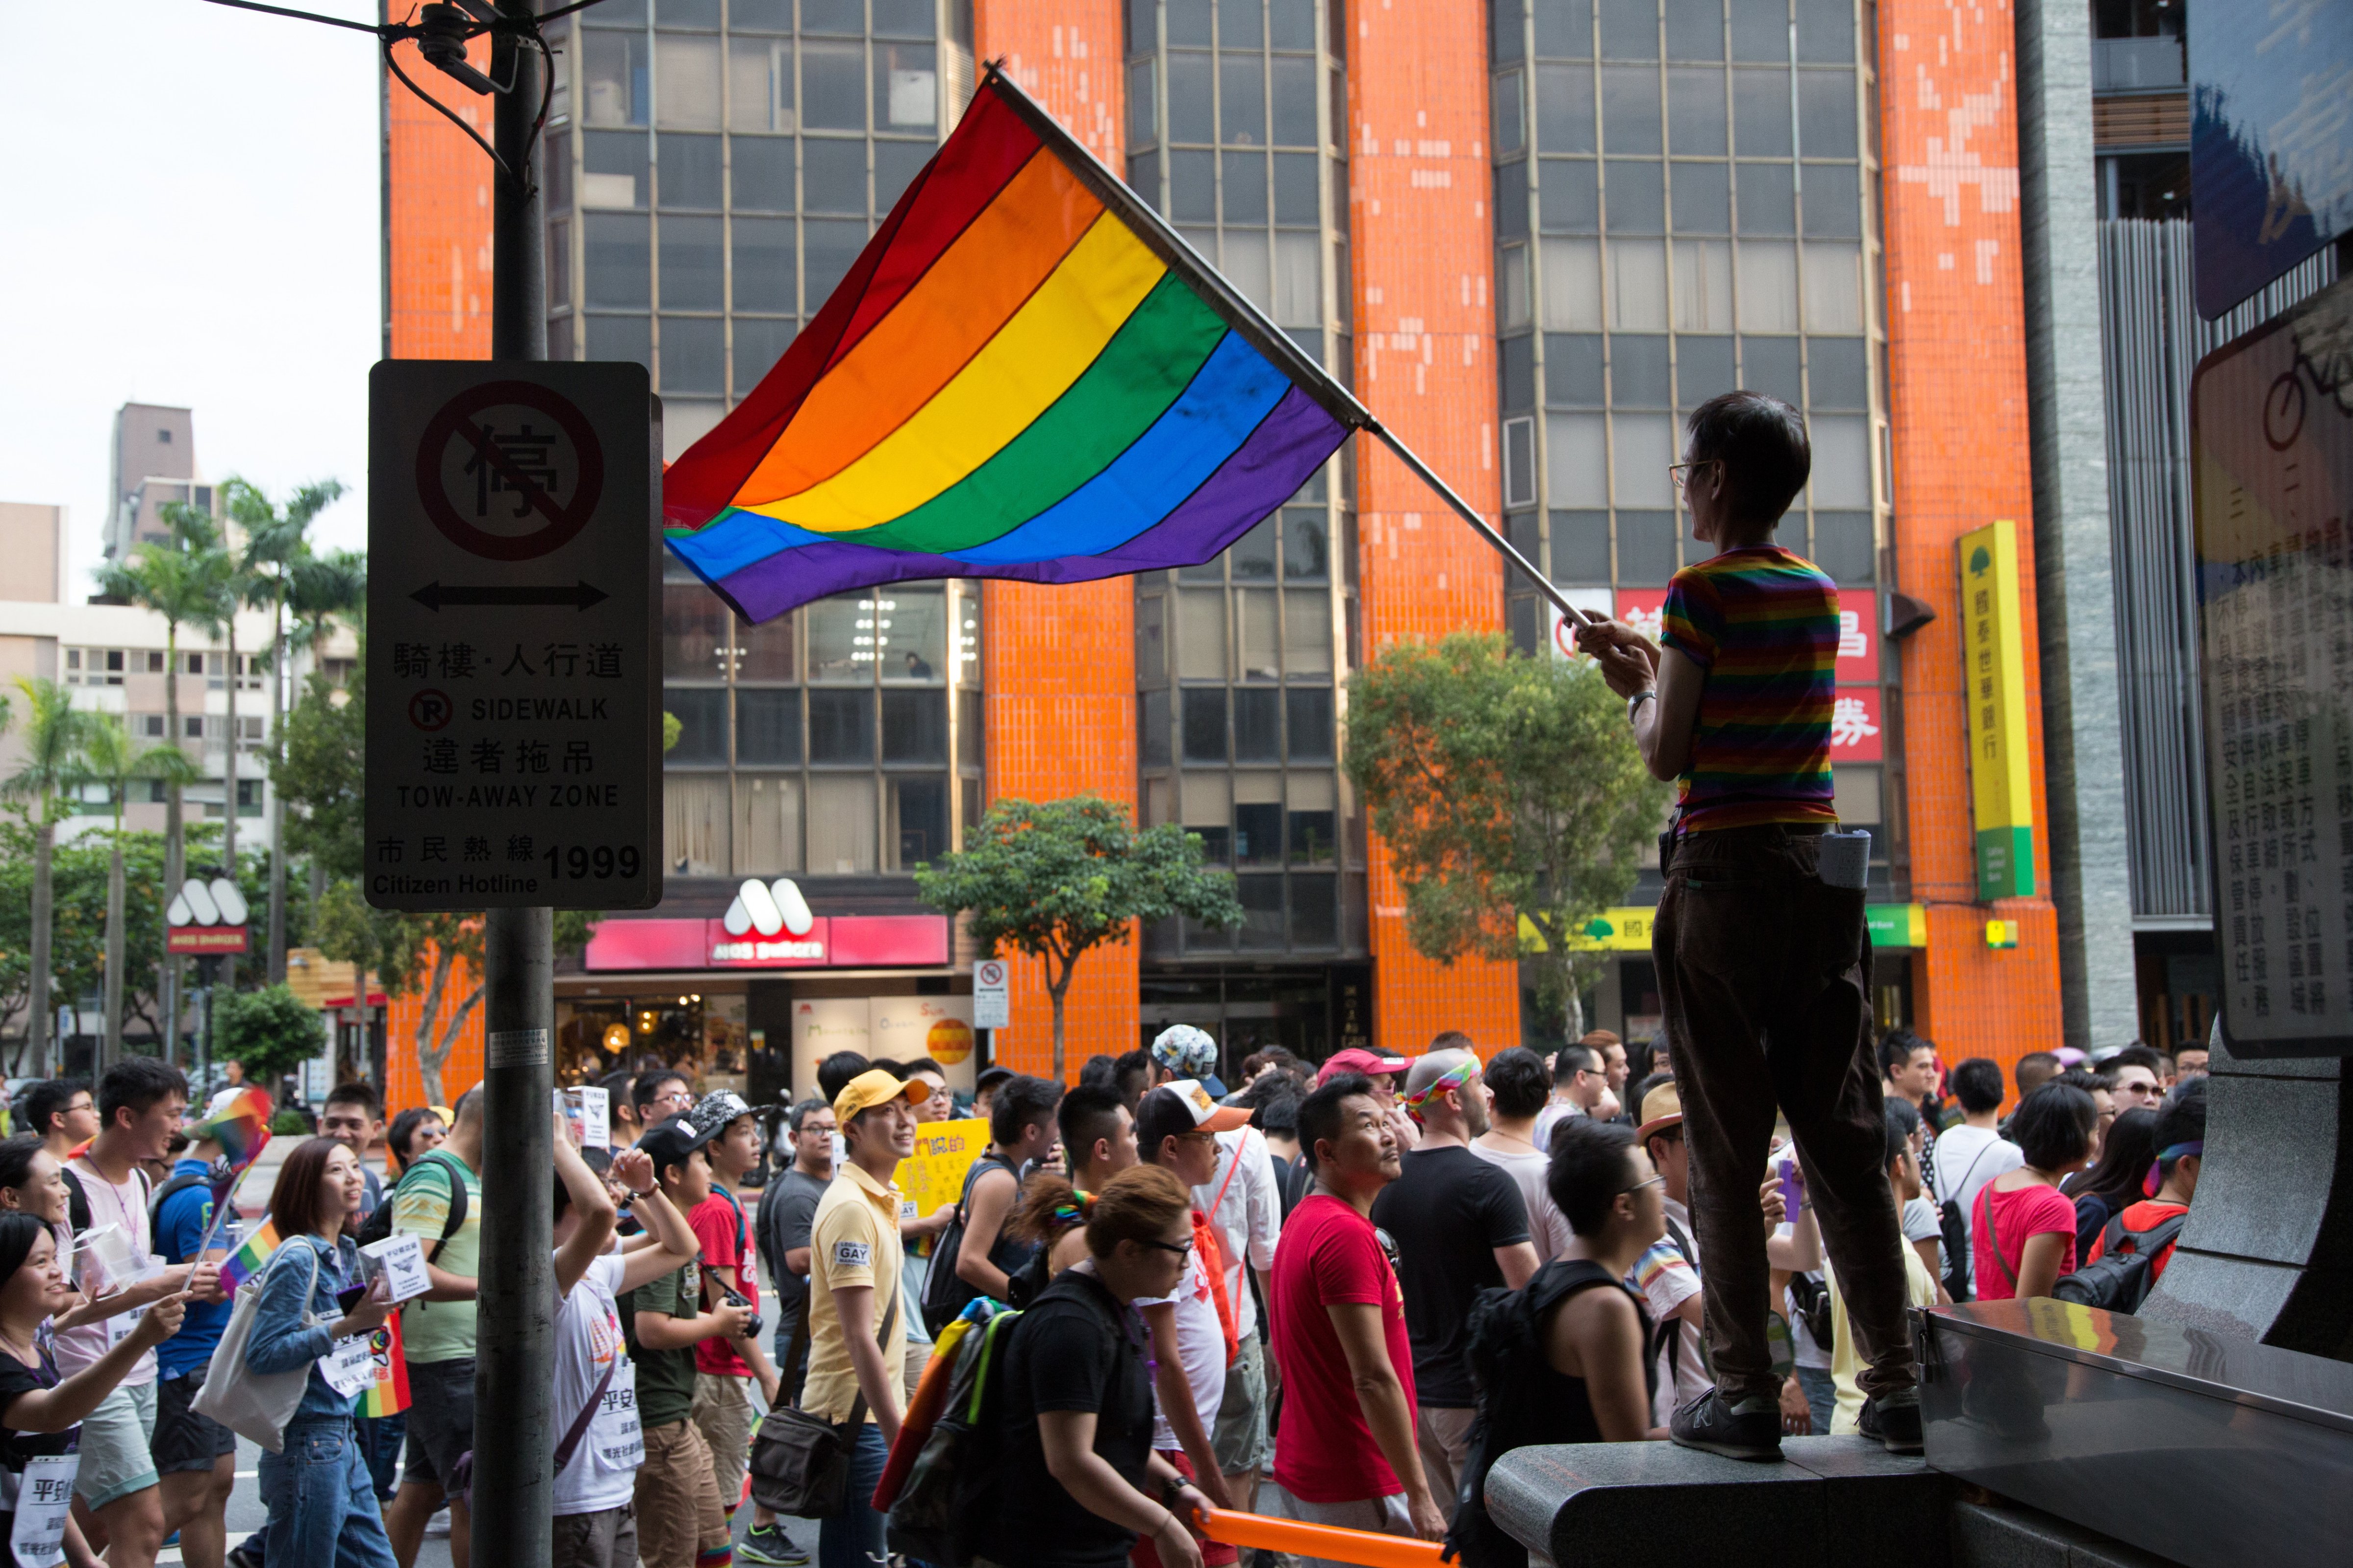 A man waves the LGBT rainbow flag in support of gay marriage as a campaign march calling for the legalization of gay marriage passes by.  (Craig Ferguson/LightRocket-- Getty Images) (Craig Ferguson&mdash;LightRocket via Getty Images)